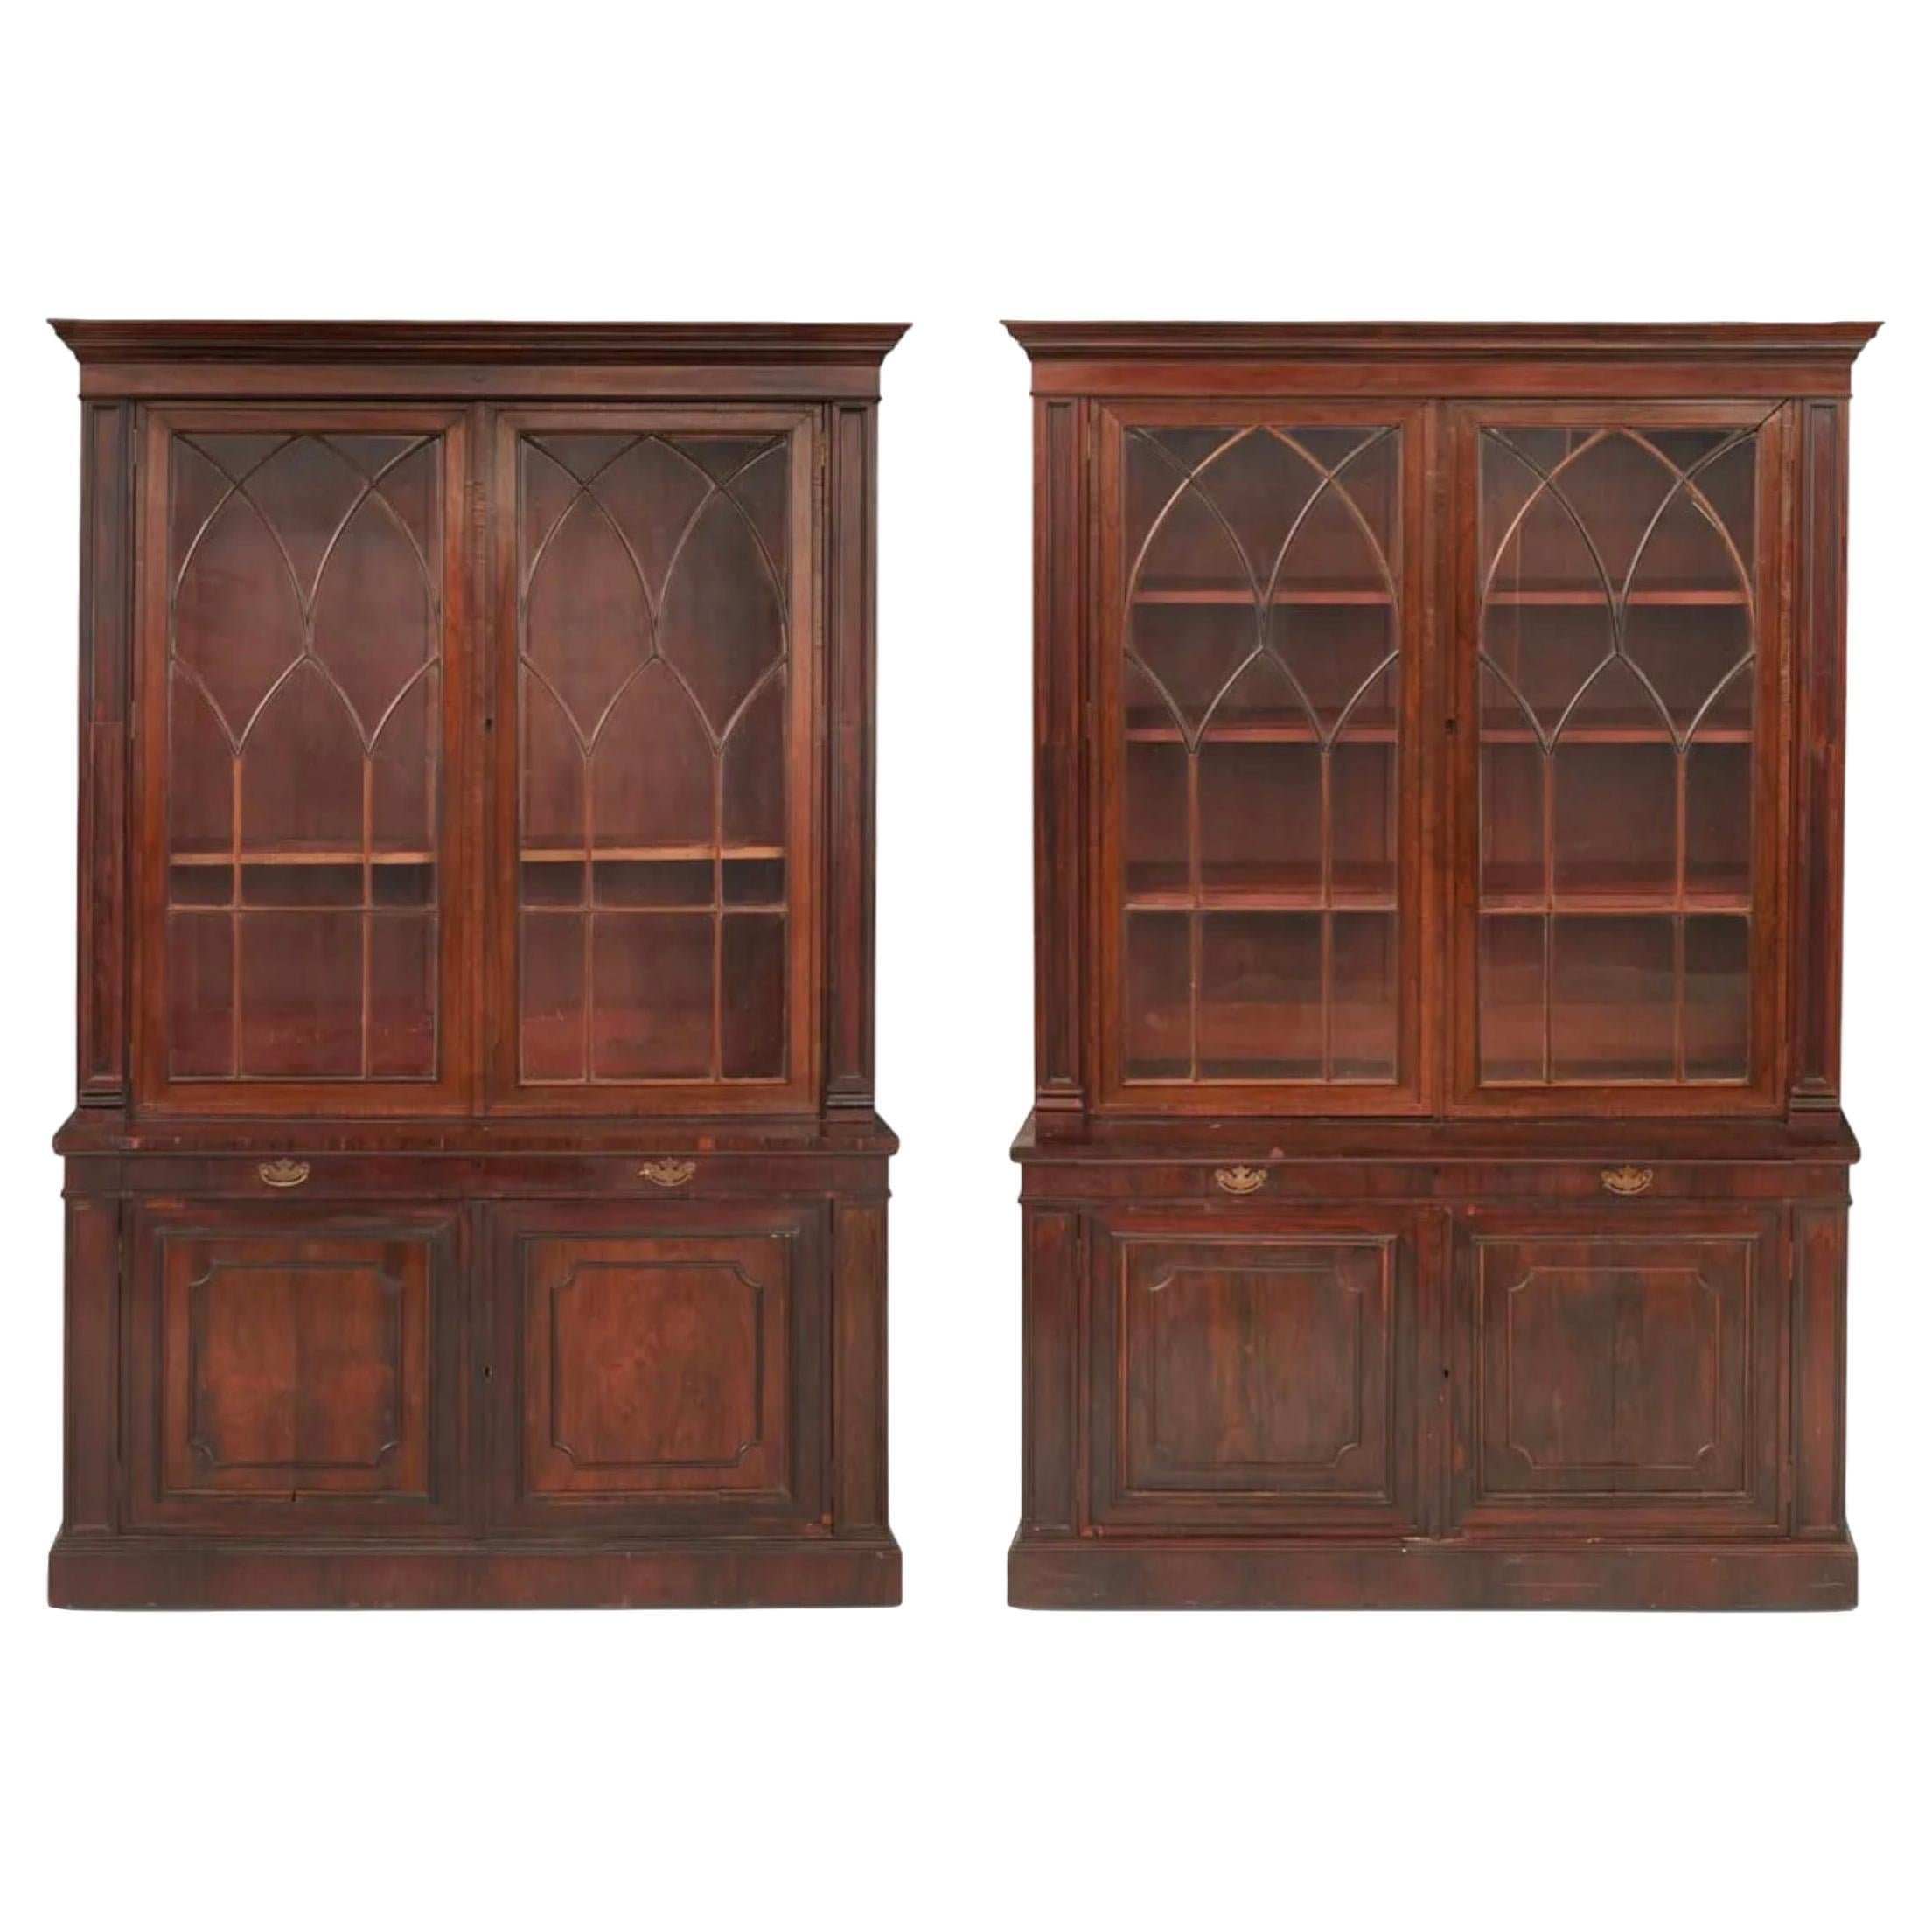 A Pair of Regency Rosewood Bookcases